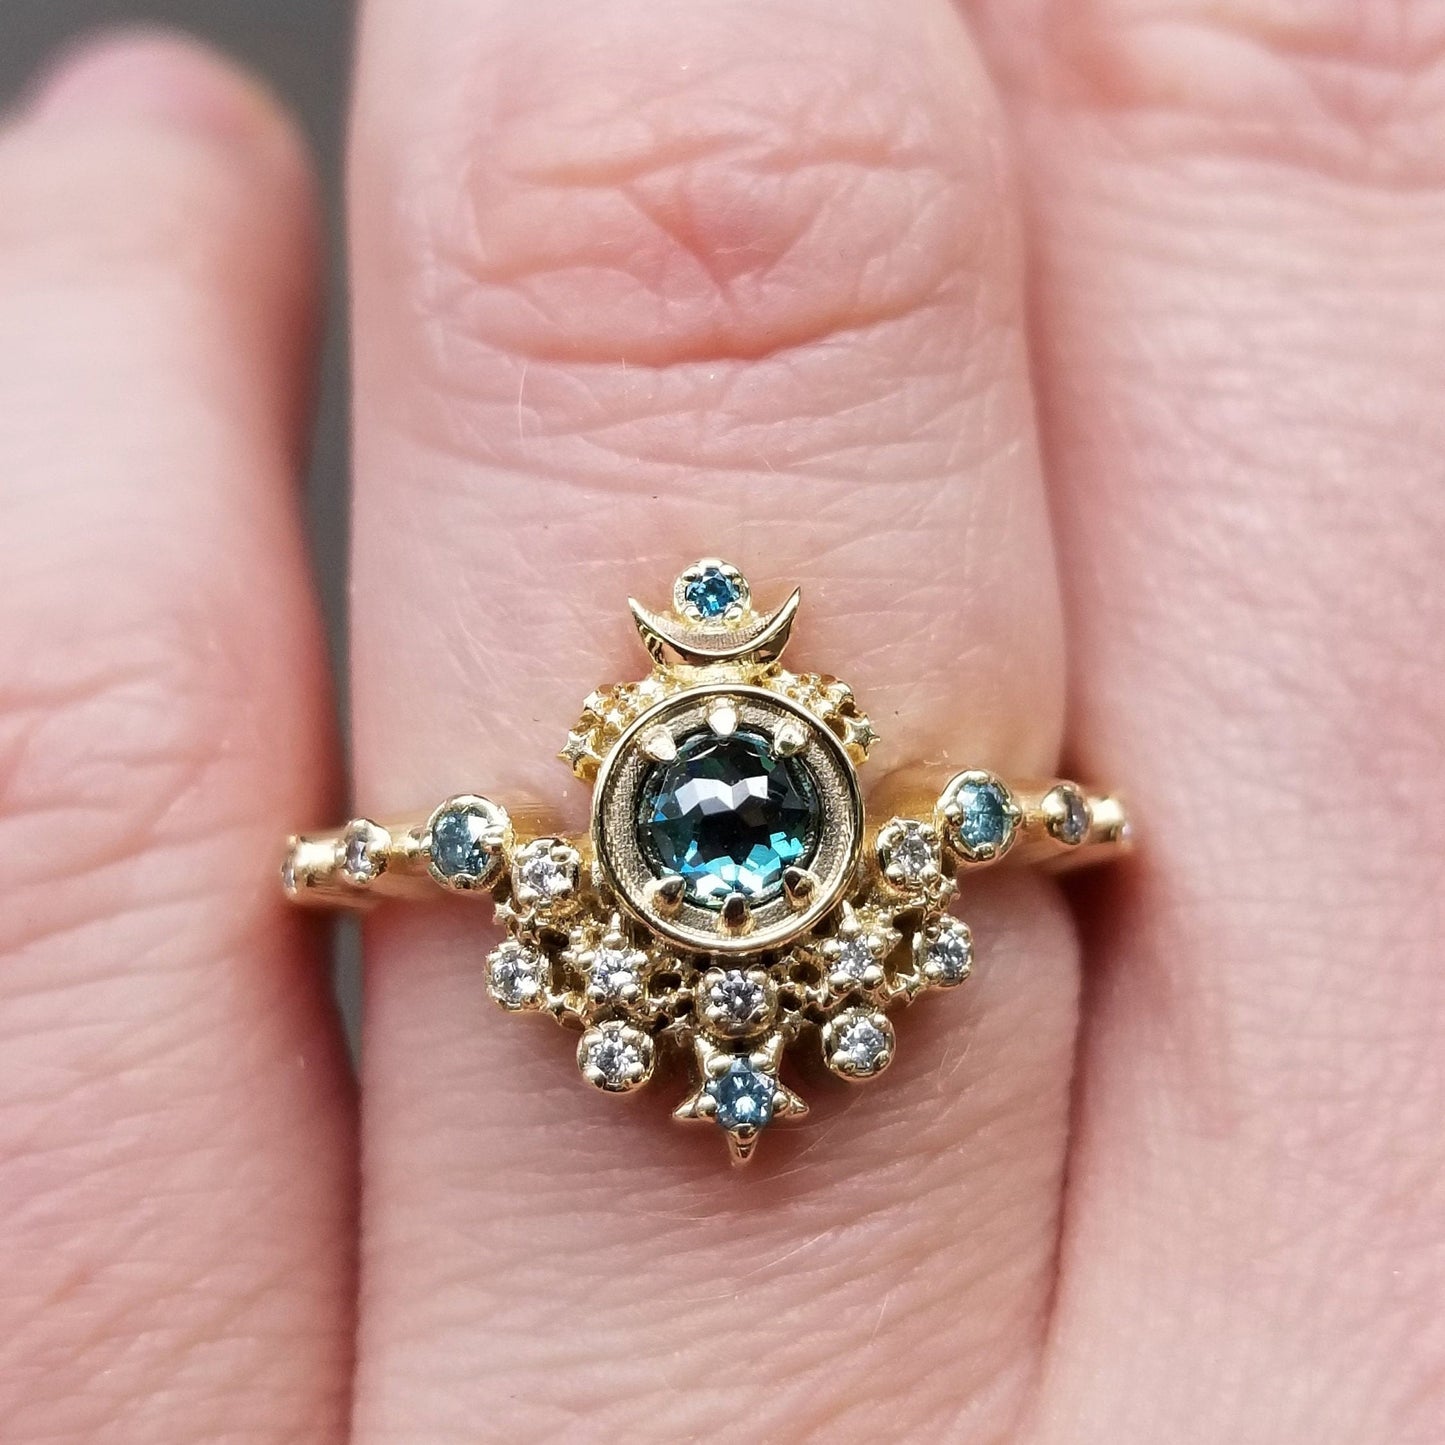 Rose Cut Blue Diamond Moon Witch Engagement Ring Set with Sunray - 14k Yellow Gold Celestial Gothic Unique Handmade Jewelry